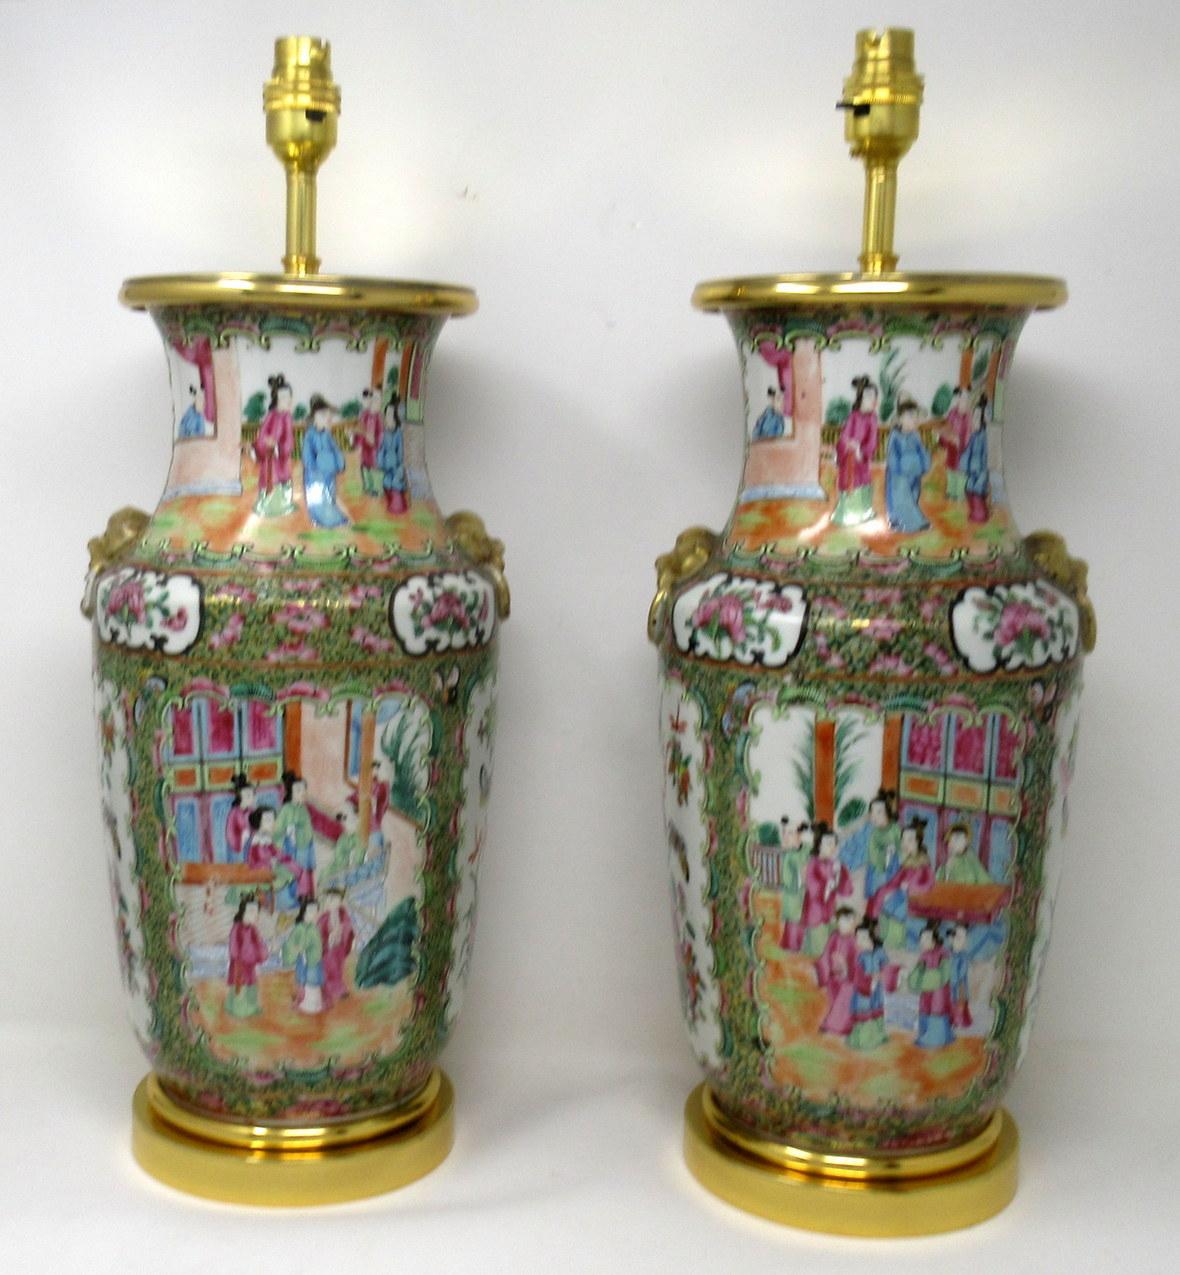 An Exceptionally Fine Pair of Cantonese Hand Decorated Porcelain Oil Lamps with ornate Ormolu bases now converted to Electric Table Lamps, of good size proportions, (see last image in situ) mid Nineteenth Century. 

The main outer bodies of